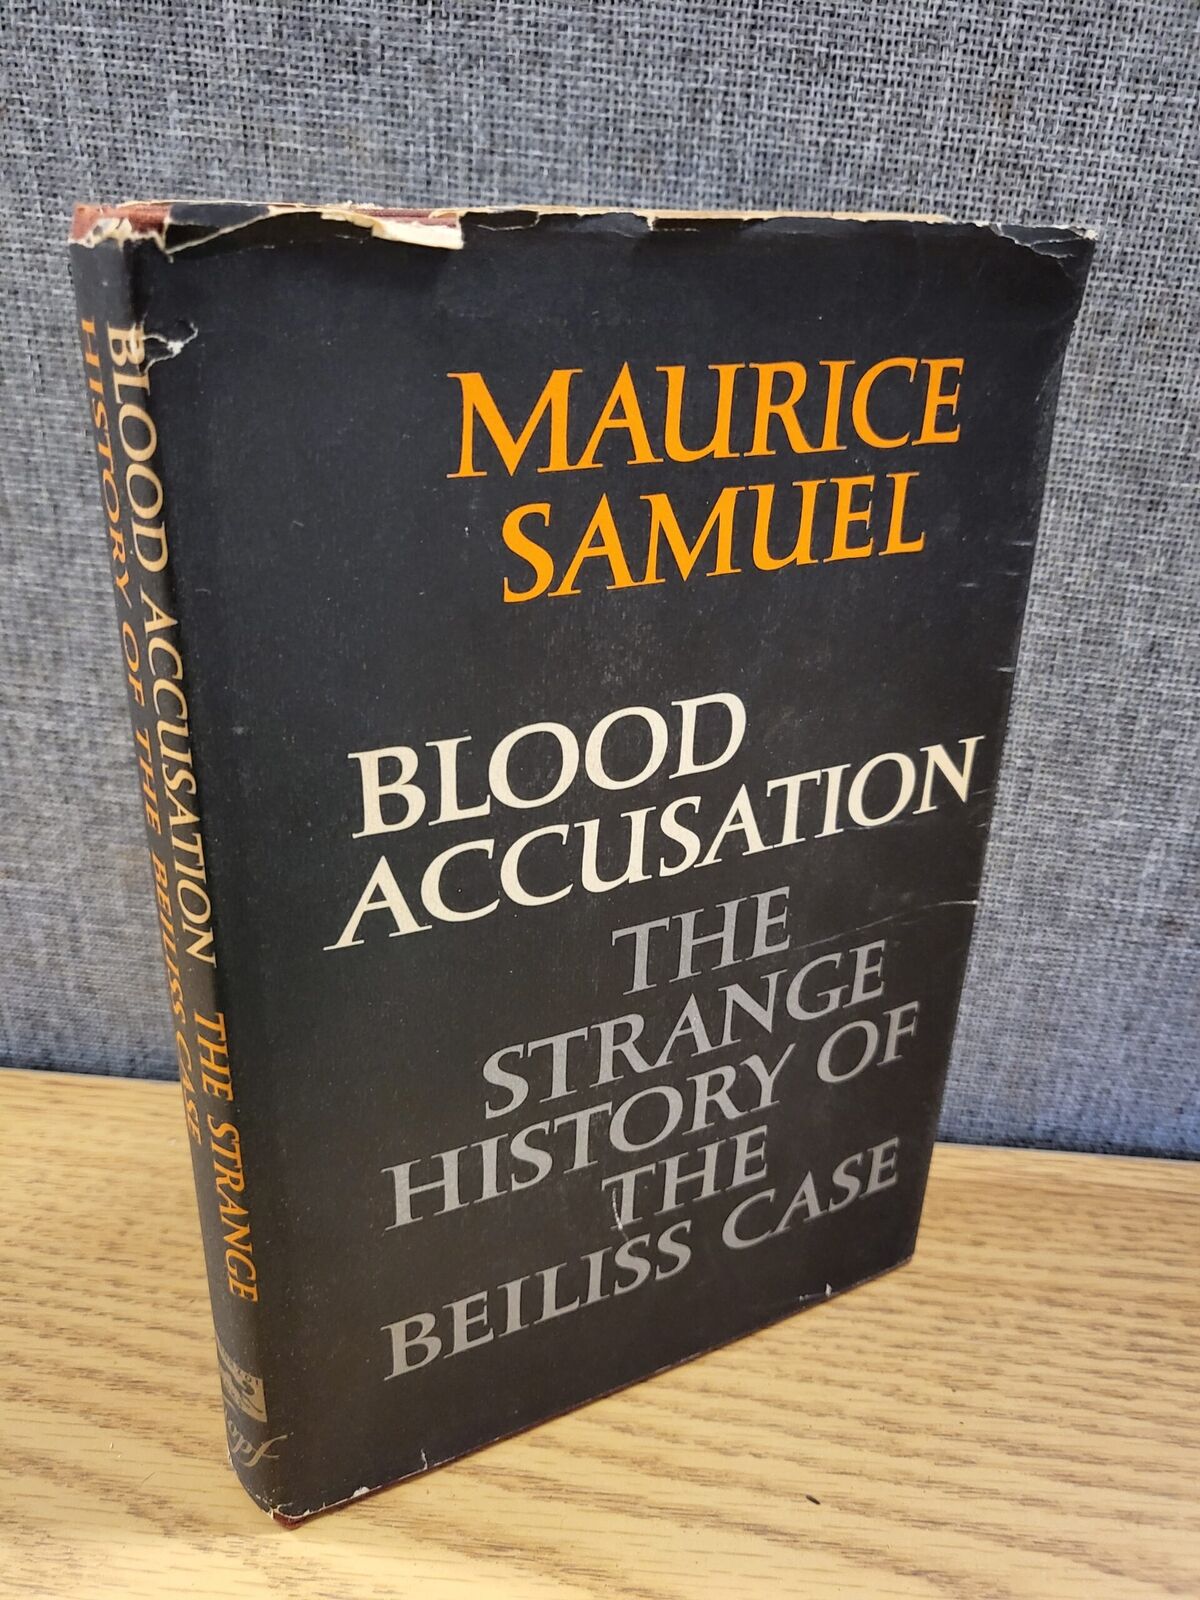 Blood Accusation the Strange History of the Beiliss Case